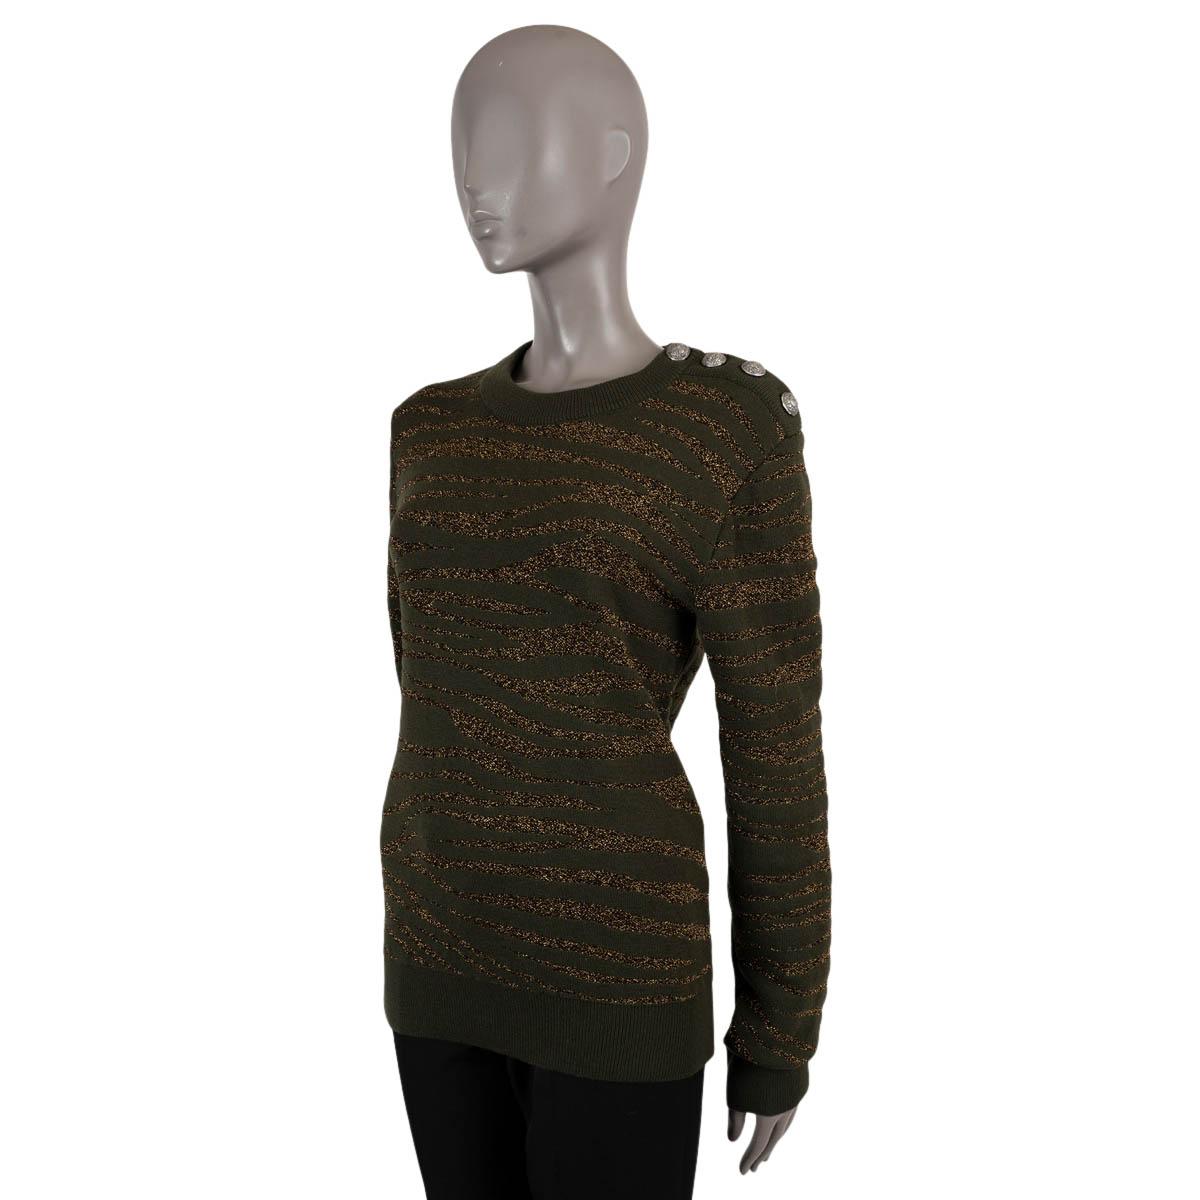 100% authentic Balmain crewneck sweater in dark green wool (80%), metallized polyester (13%) and nylon (7%) with gold lurex tiger jacquard. Opens at the neck with silver-tone buttons. Unlined. Has been worn and is in excellent